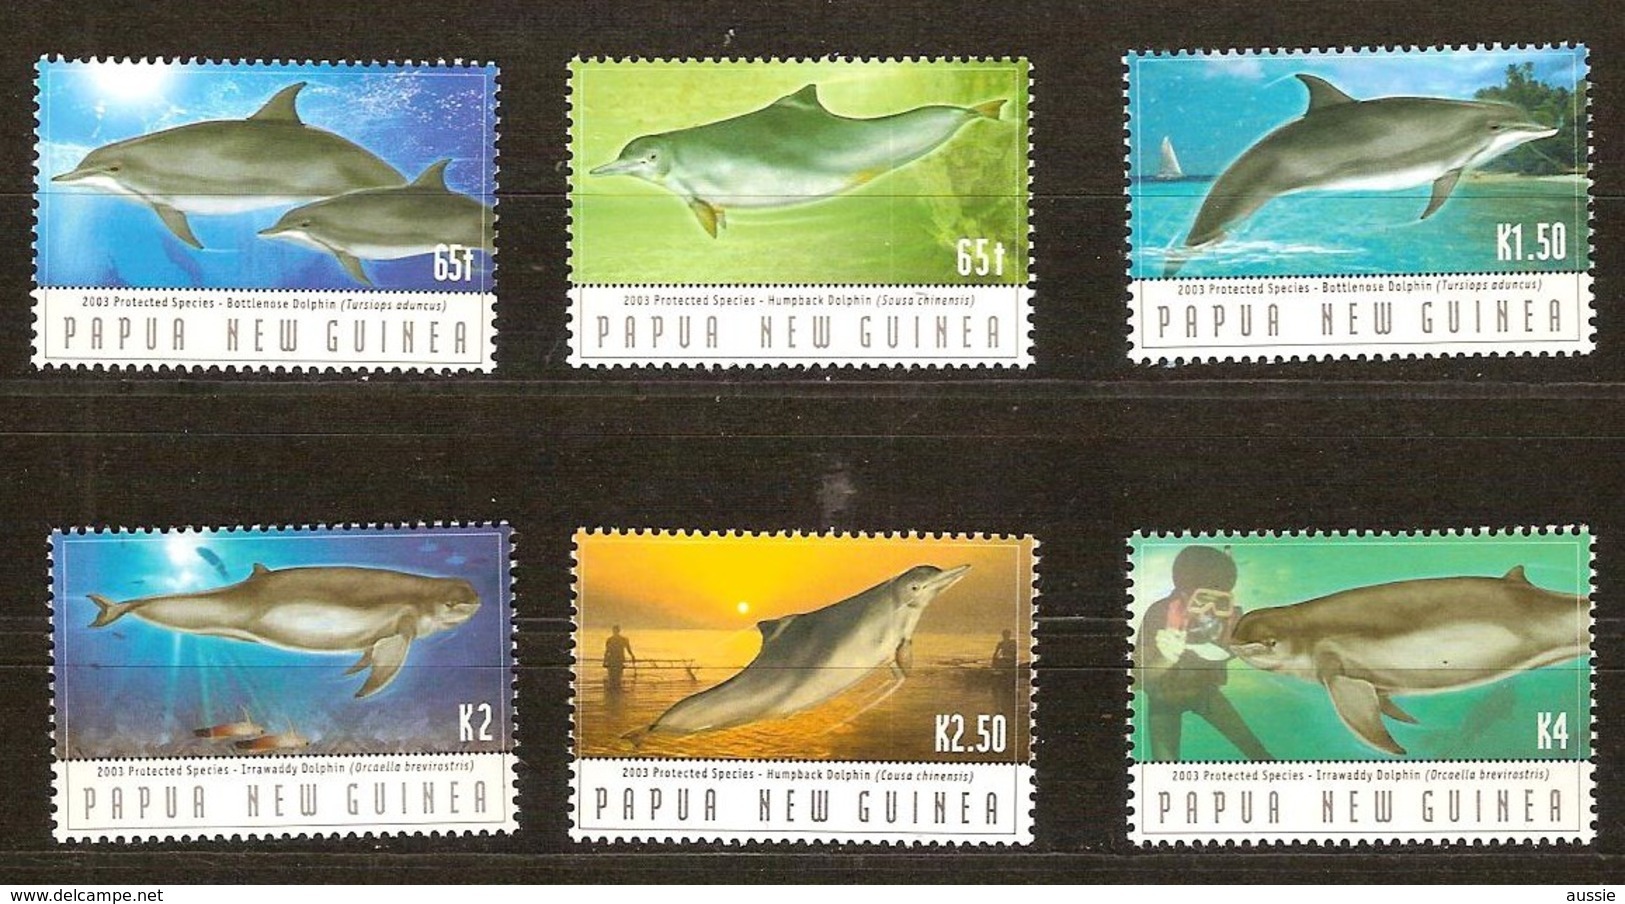 Papouasie Papua New Guinea 2003 Yvertn° 957-962 *** MNH Cote 11,50 Euro Faune Marine Dauphins - Papouasie-Nouvelle-Guinée